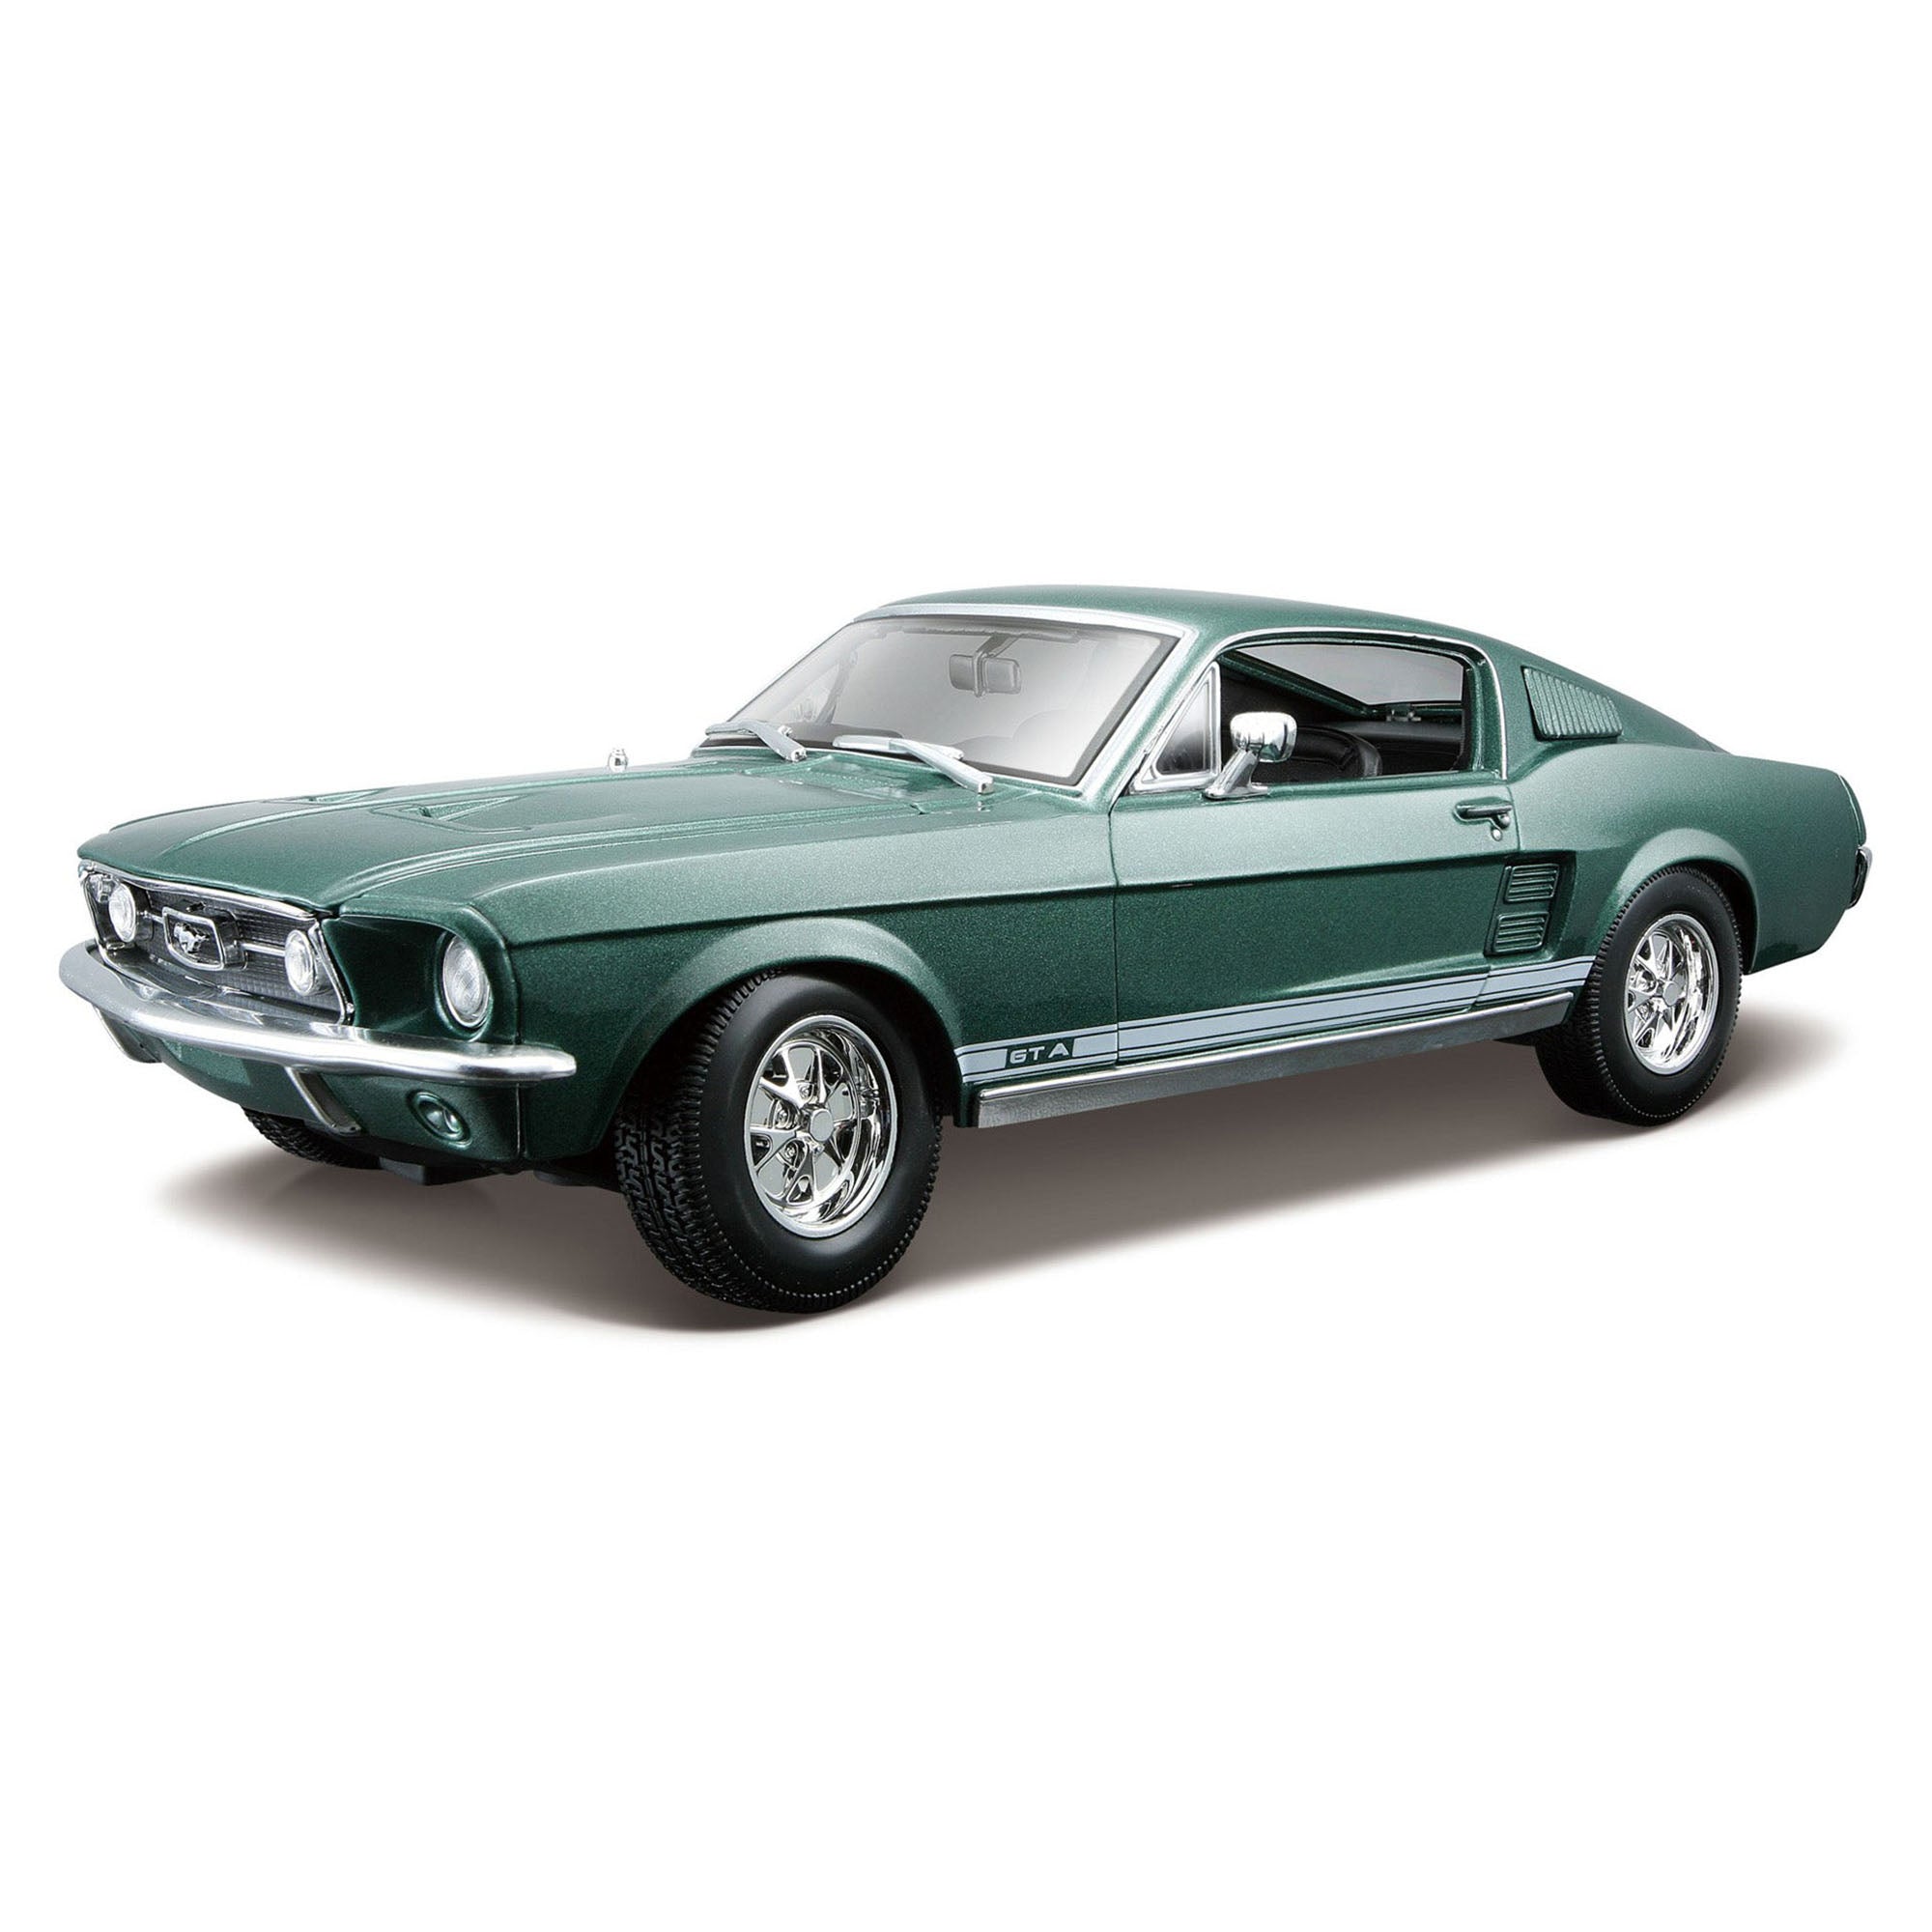 Maisto 1:18 1967 Ford Mustang Fastback - Green